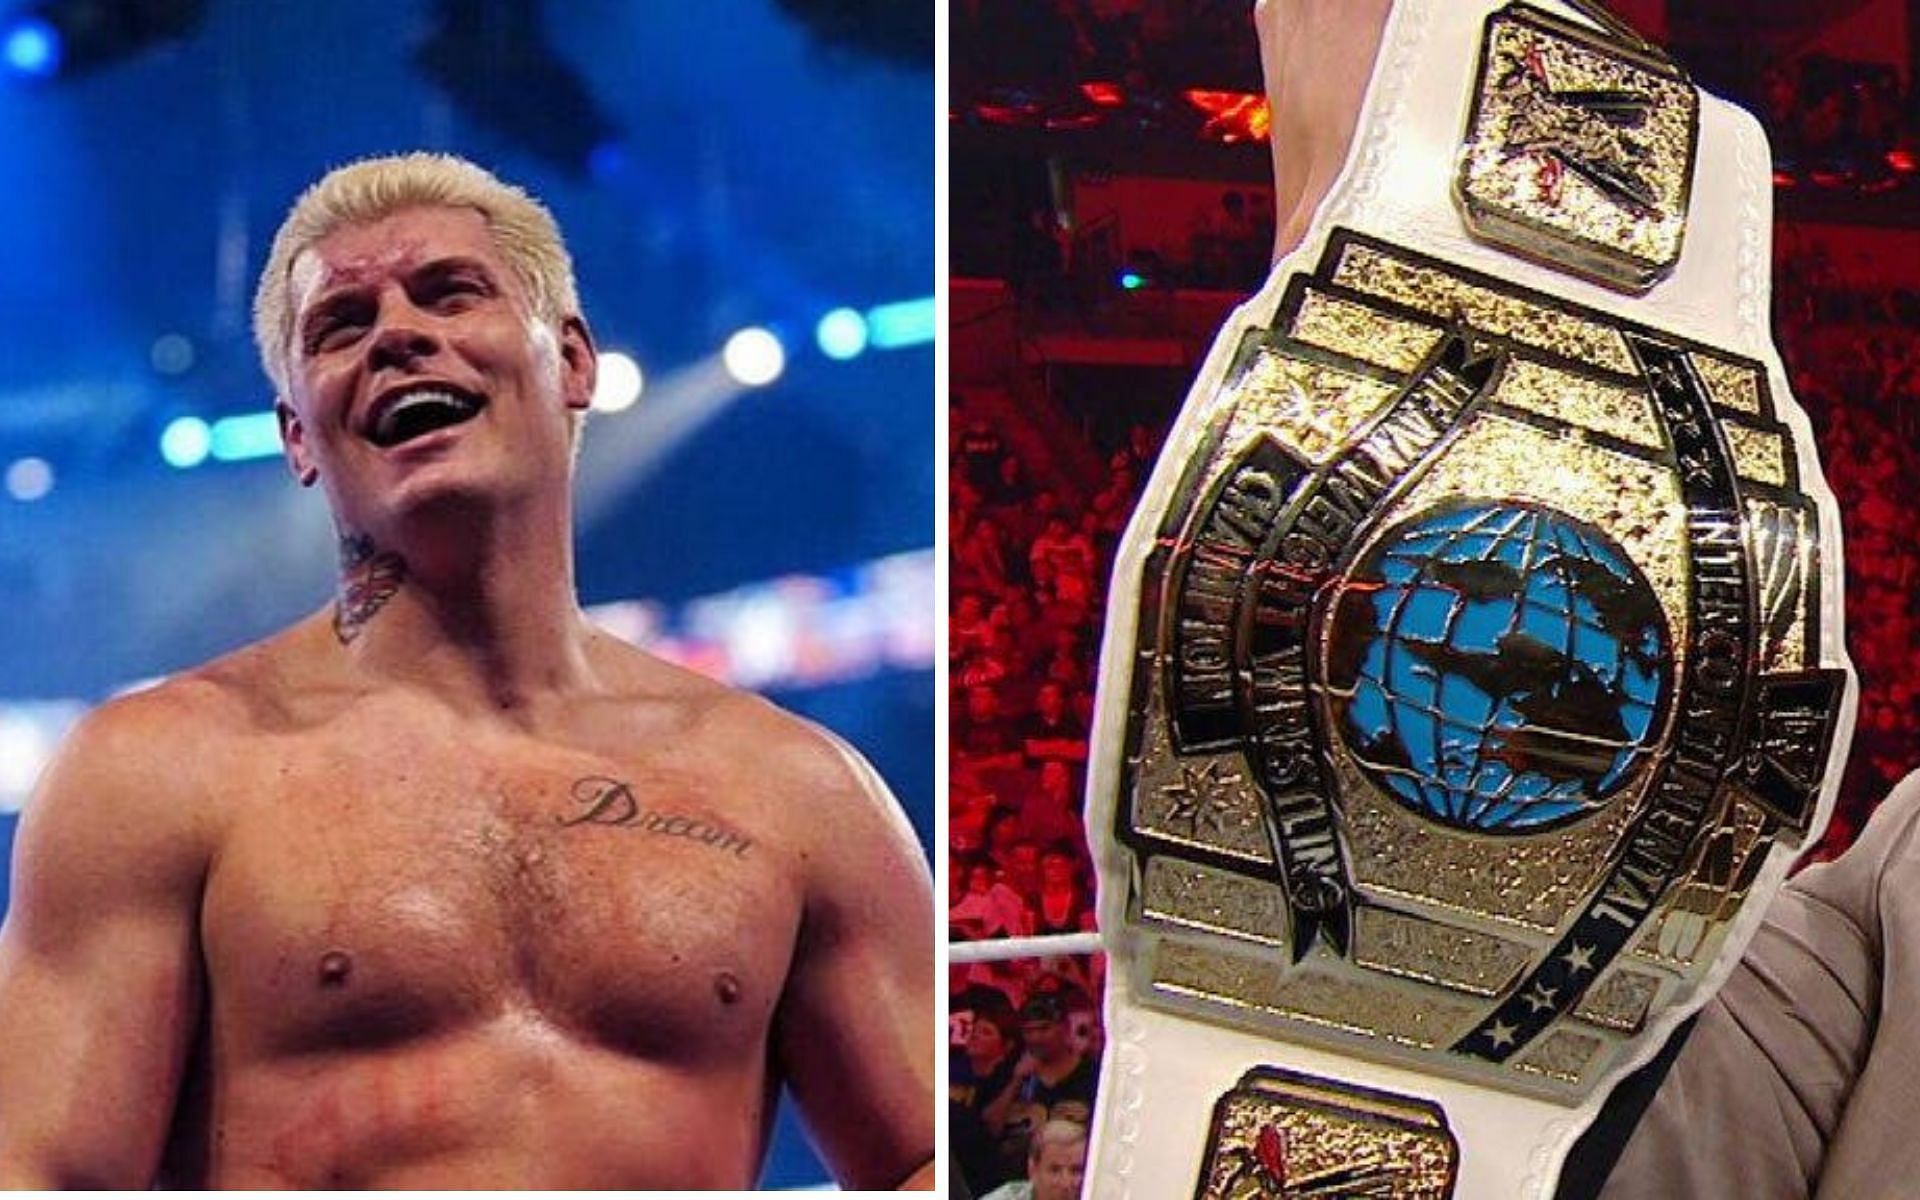 Cody Rhodes changed the IC title during his reign!